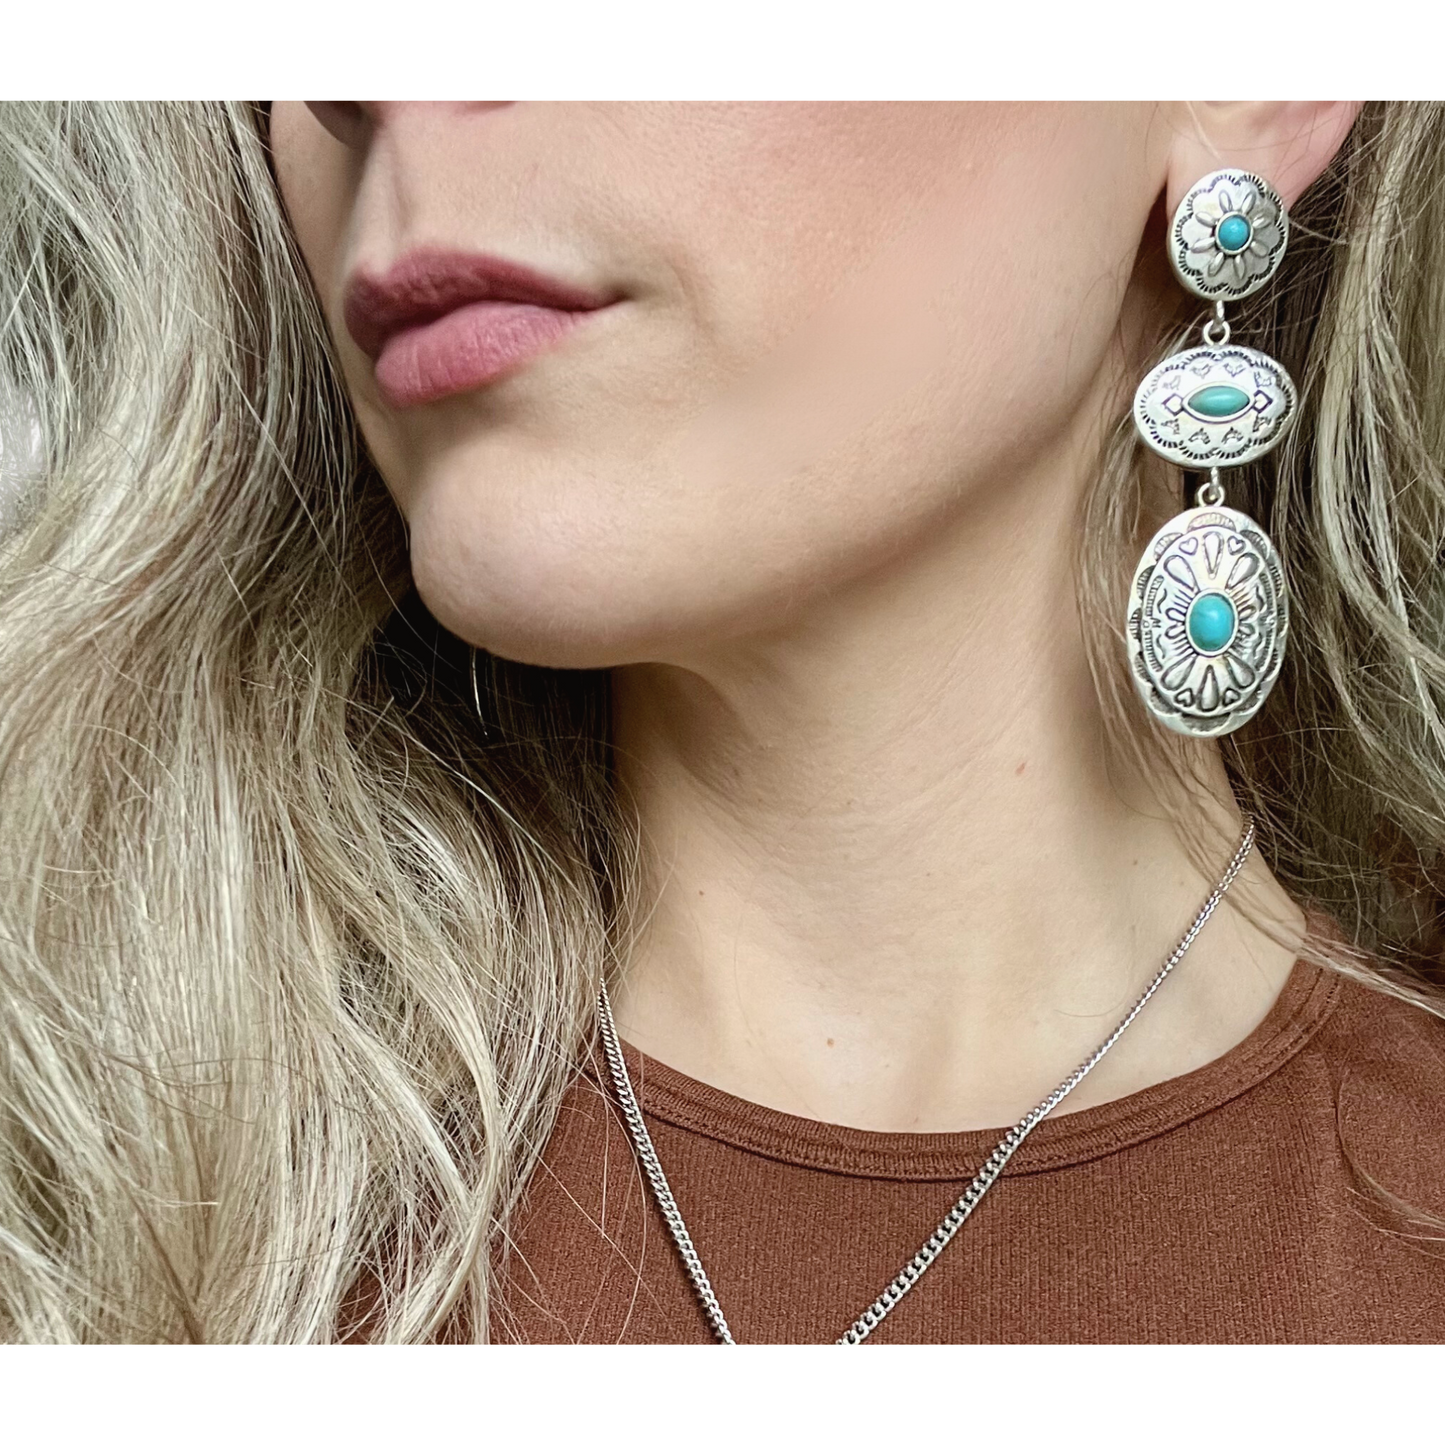 Chasing Turquoise Concho Earrings